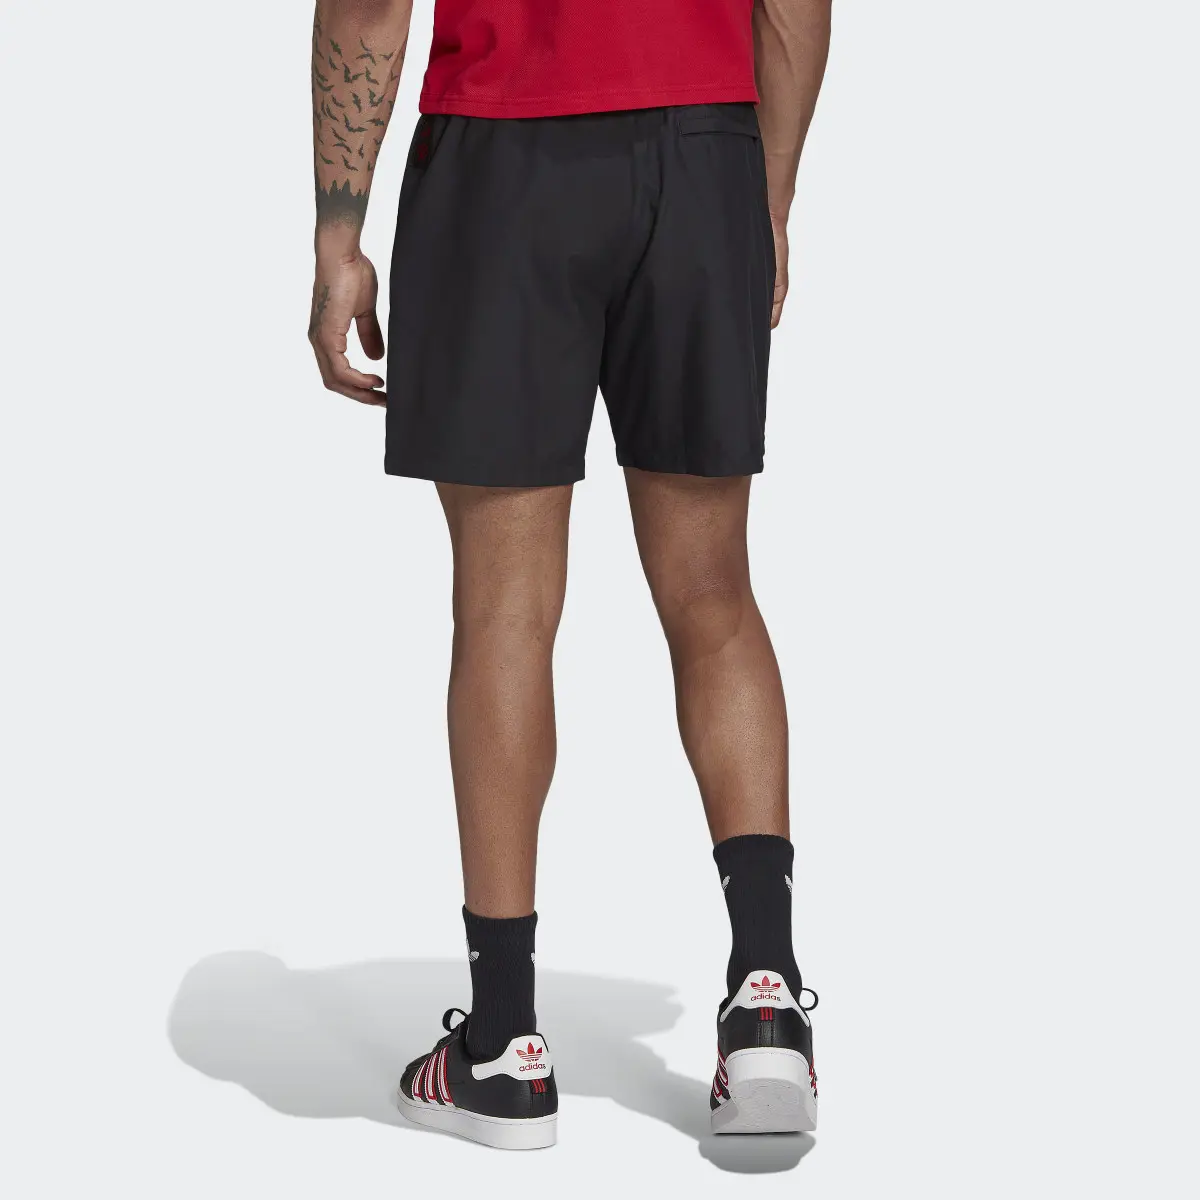 Adidas Manchester United DNA Downtime Shorts. 2